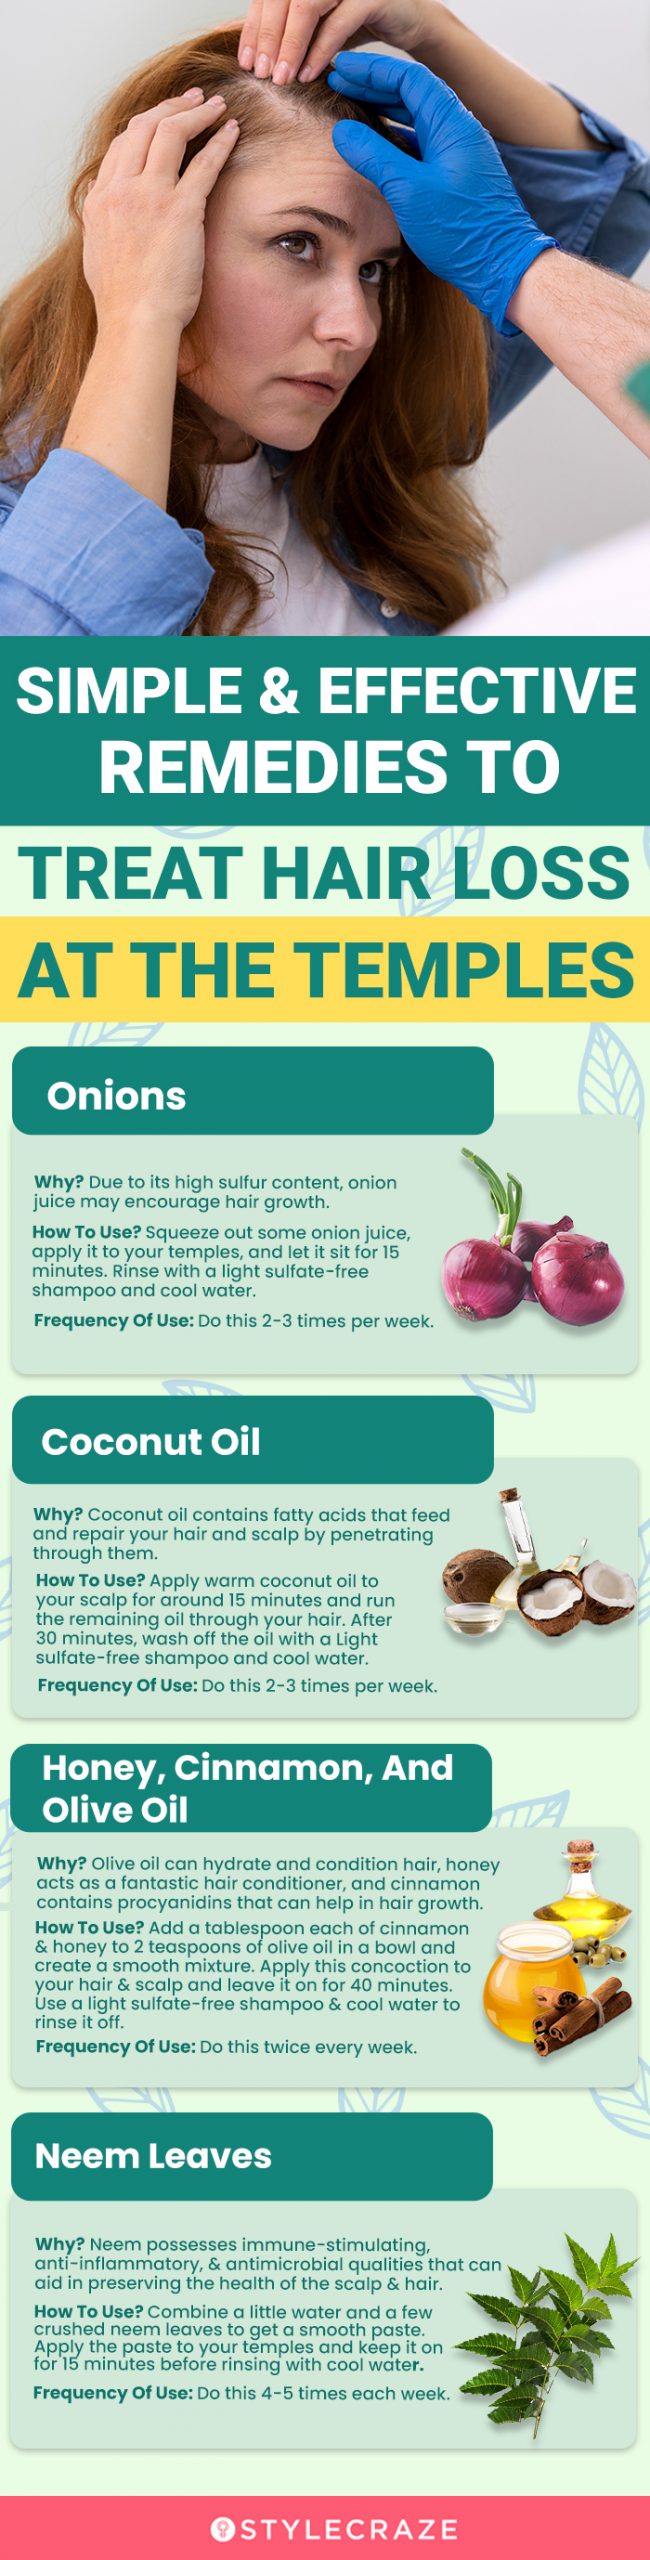 simple and effective remedies to treat hairloss at the temples [infographic]